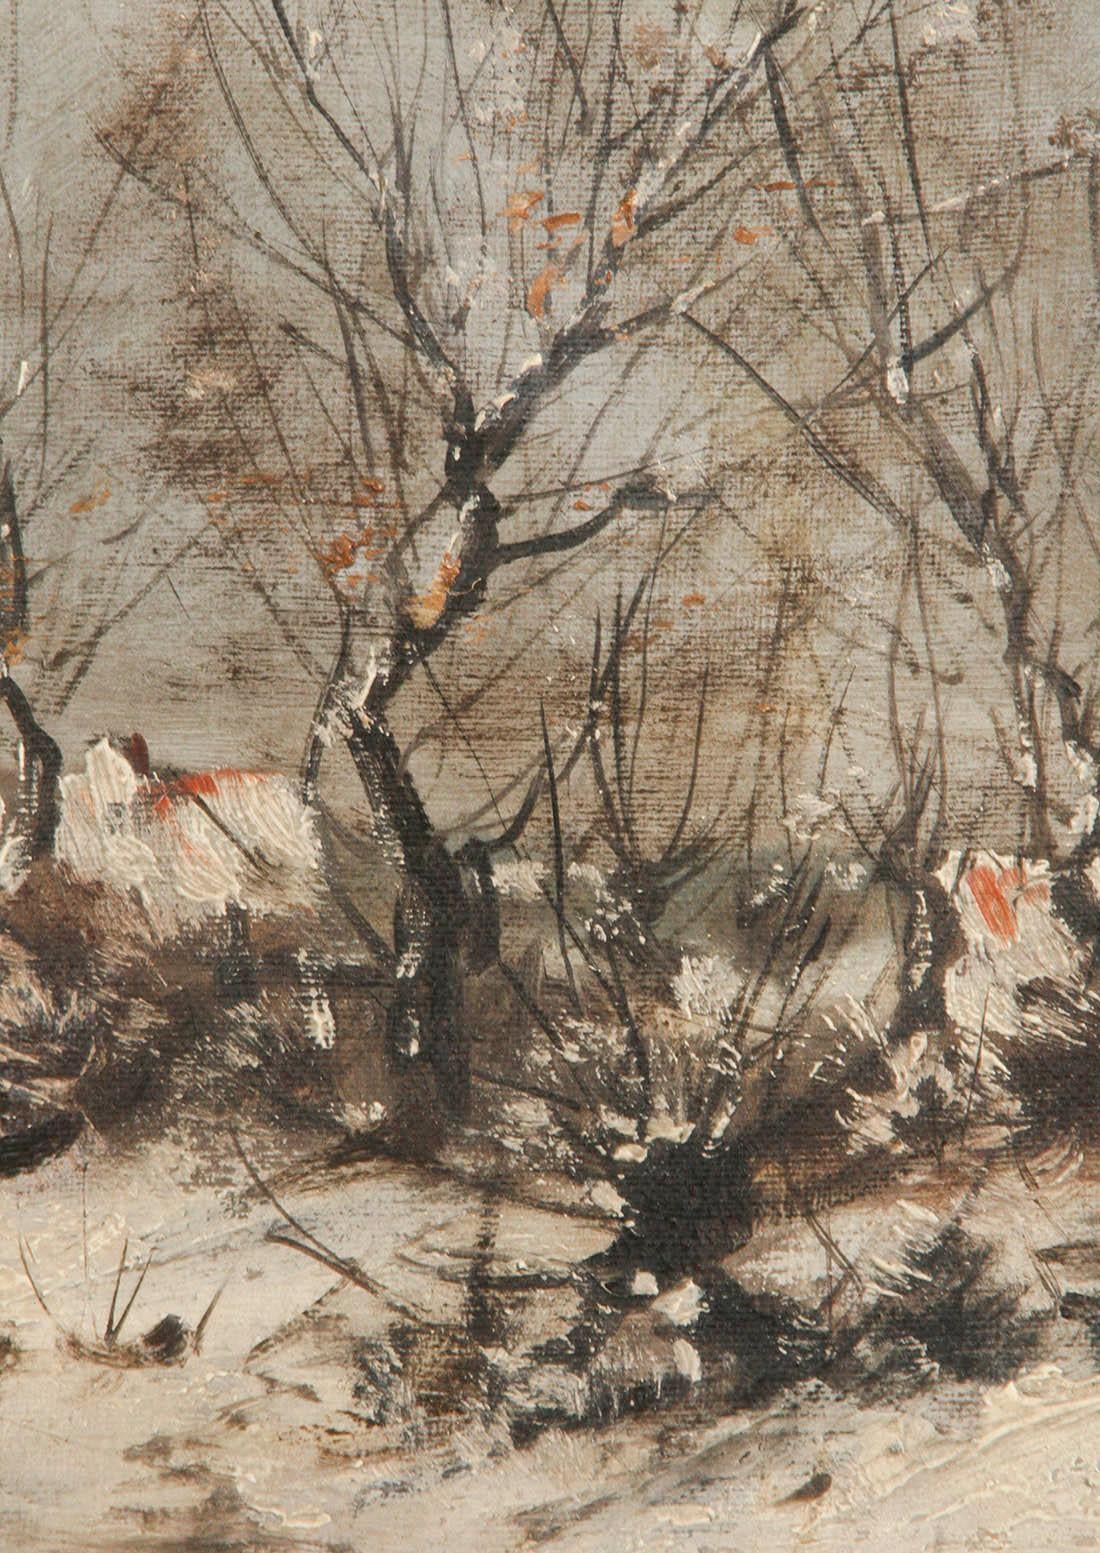 Hand-Painted Oil Painting on Canvas, Winterlandscape by Jean Hill, Belgium, Late 19th Century